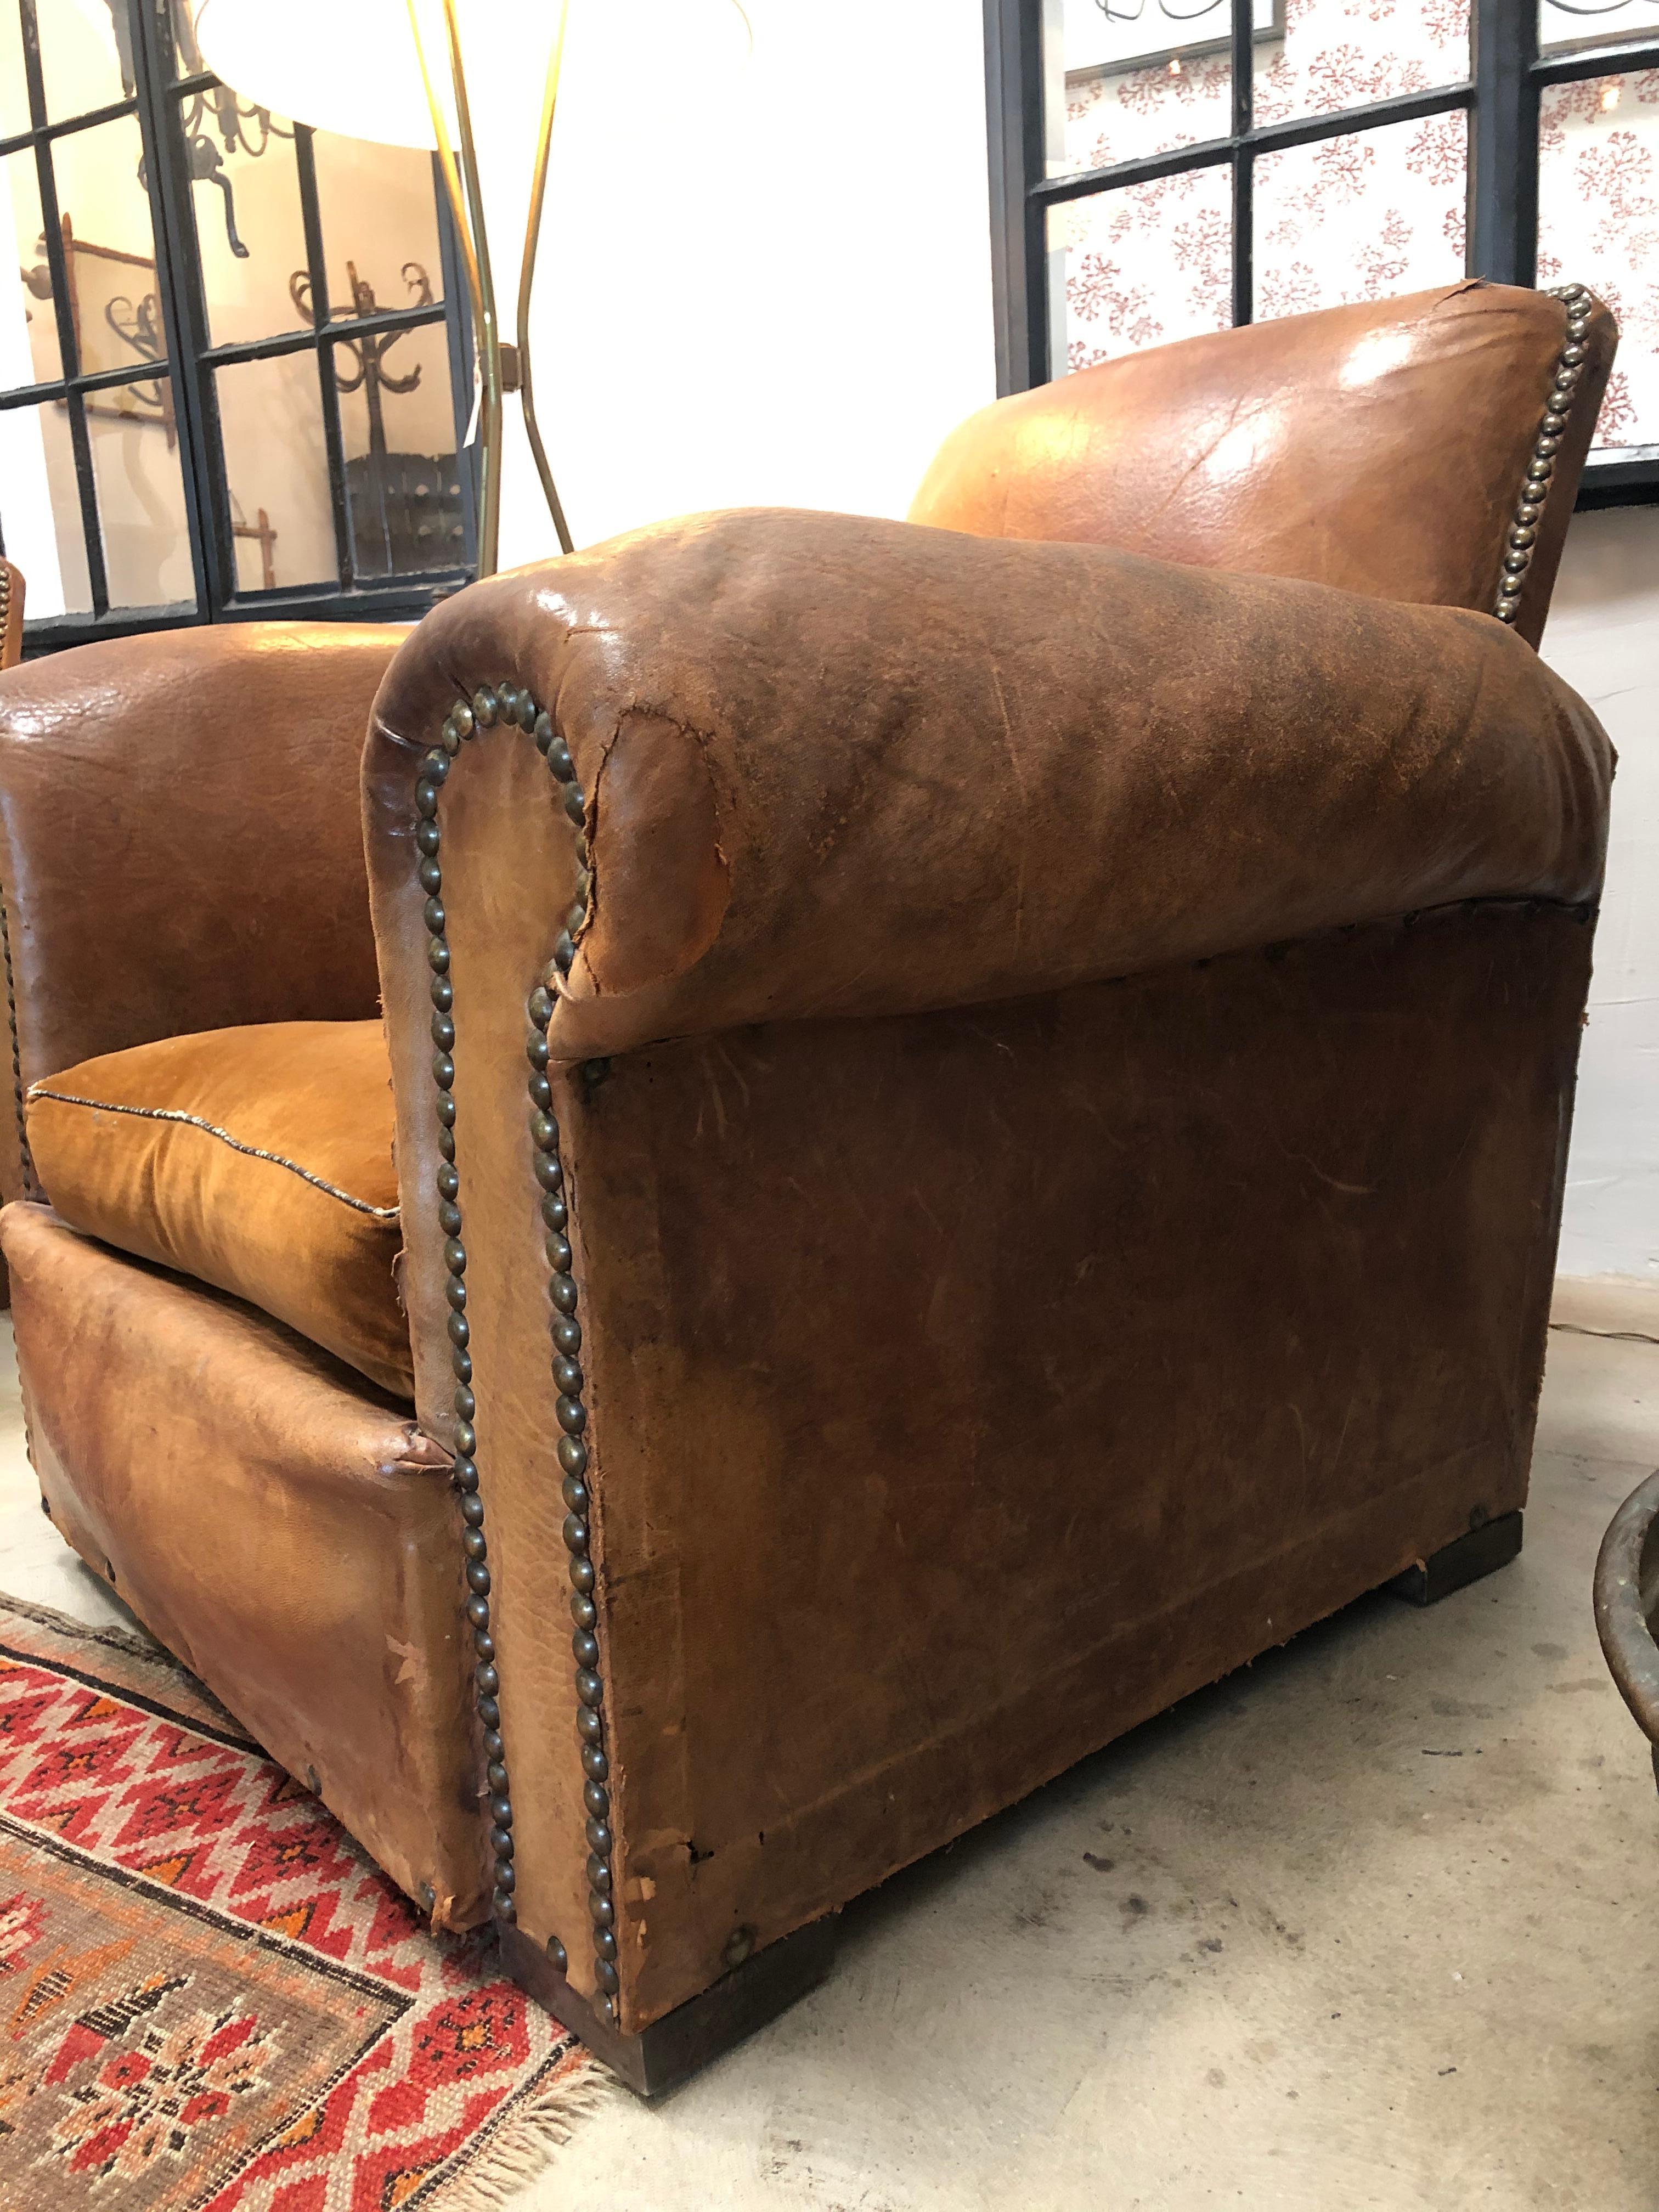 Vintage leather club chair, pair with velvet seats. Detailed with nail studding. Camel leather is soft and velvet cushion fluffed. This set is from the early 1900s, between 1920-1940. A great pair of chairs for any space. Completely comfortable, no